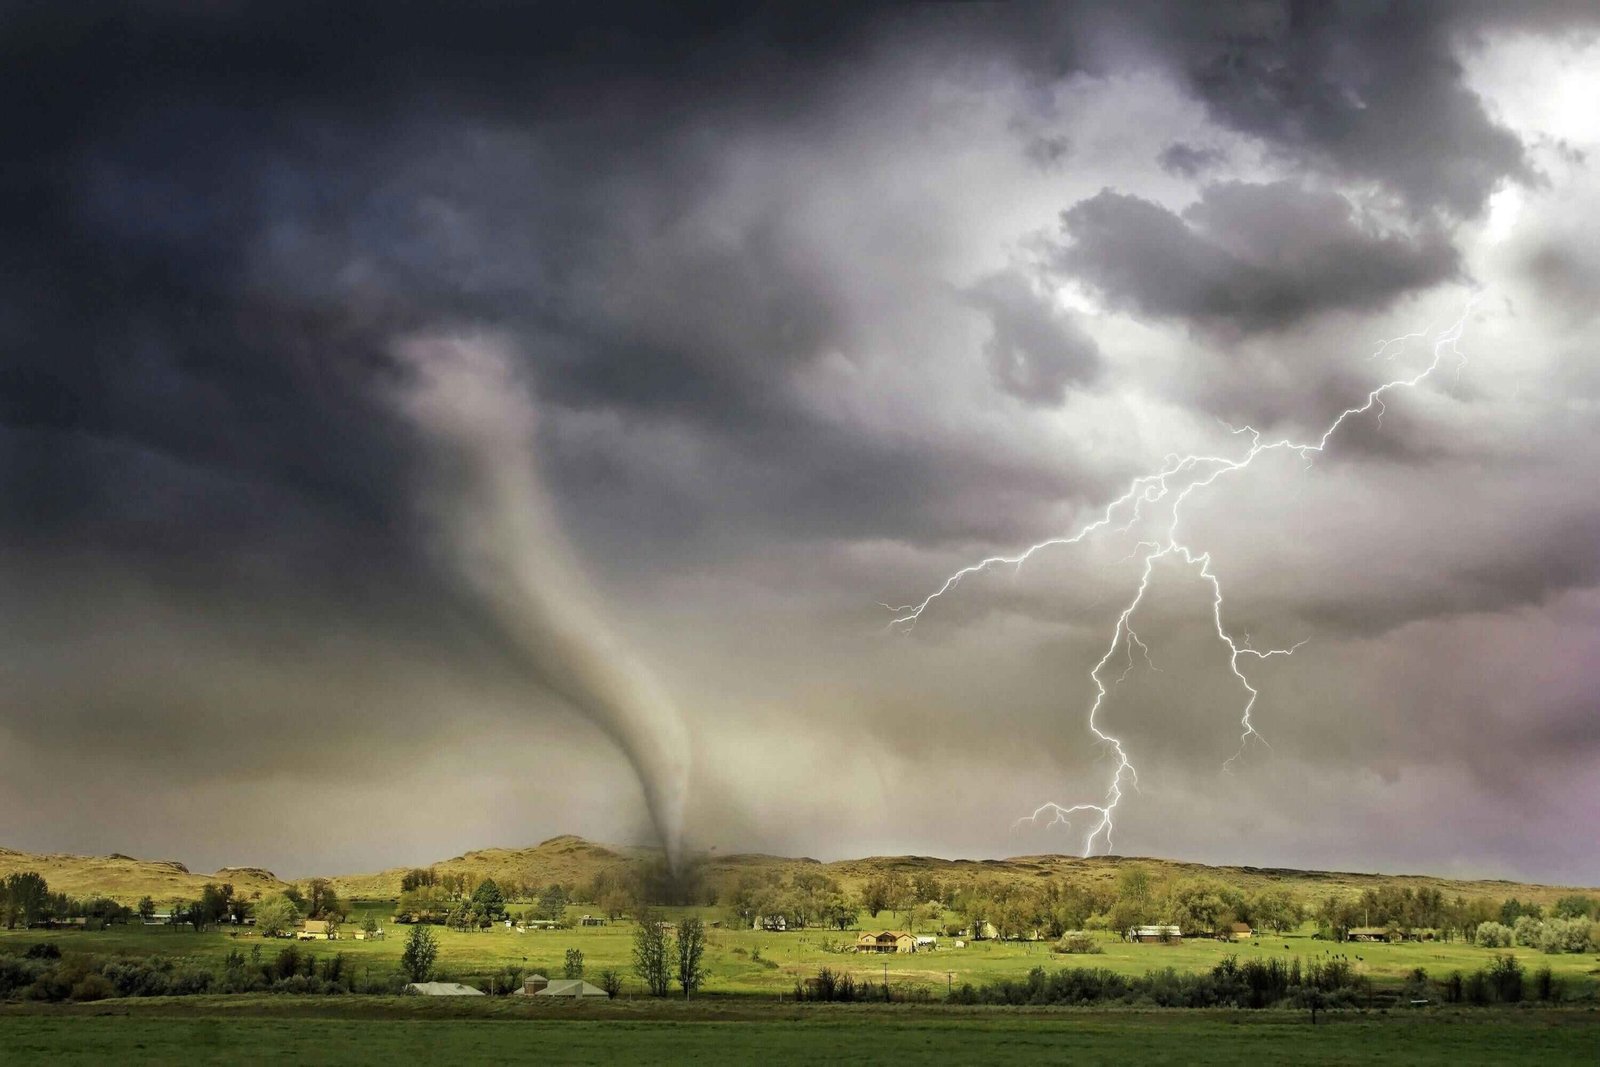 Researchers Discovering Today About Tornadoes